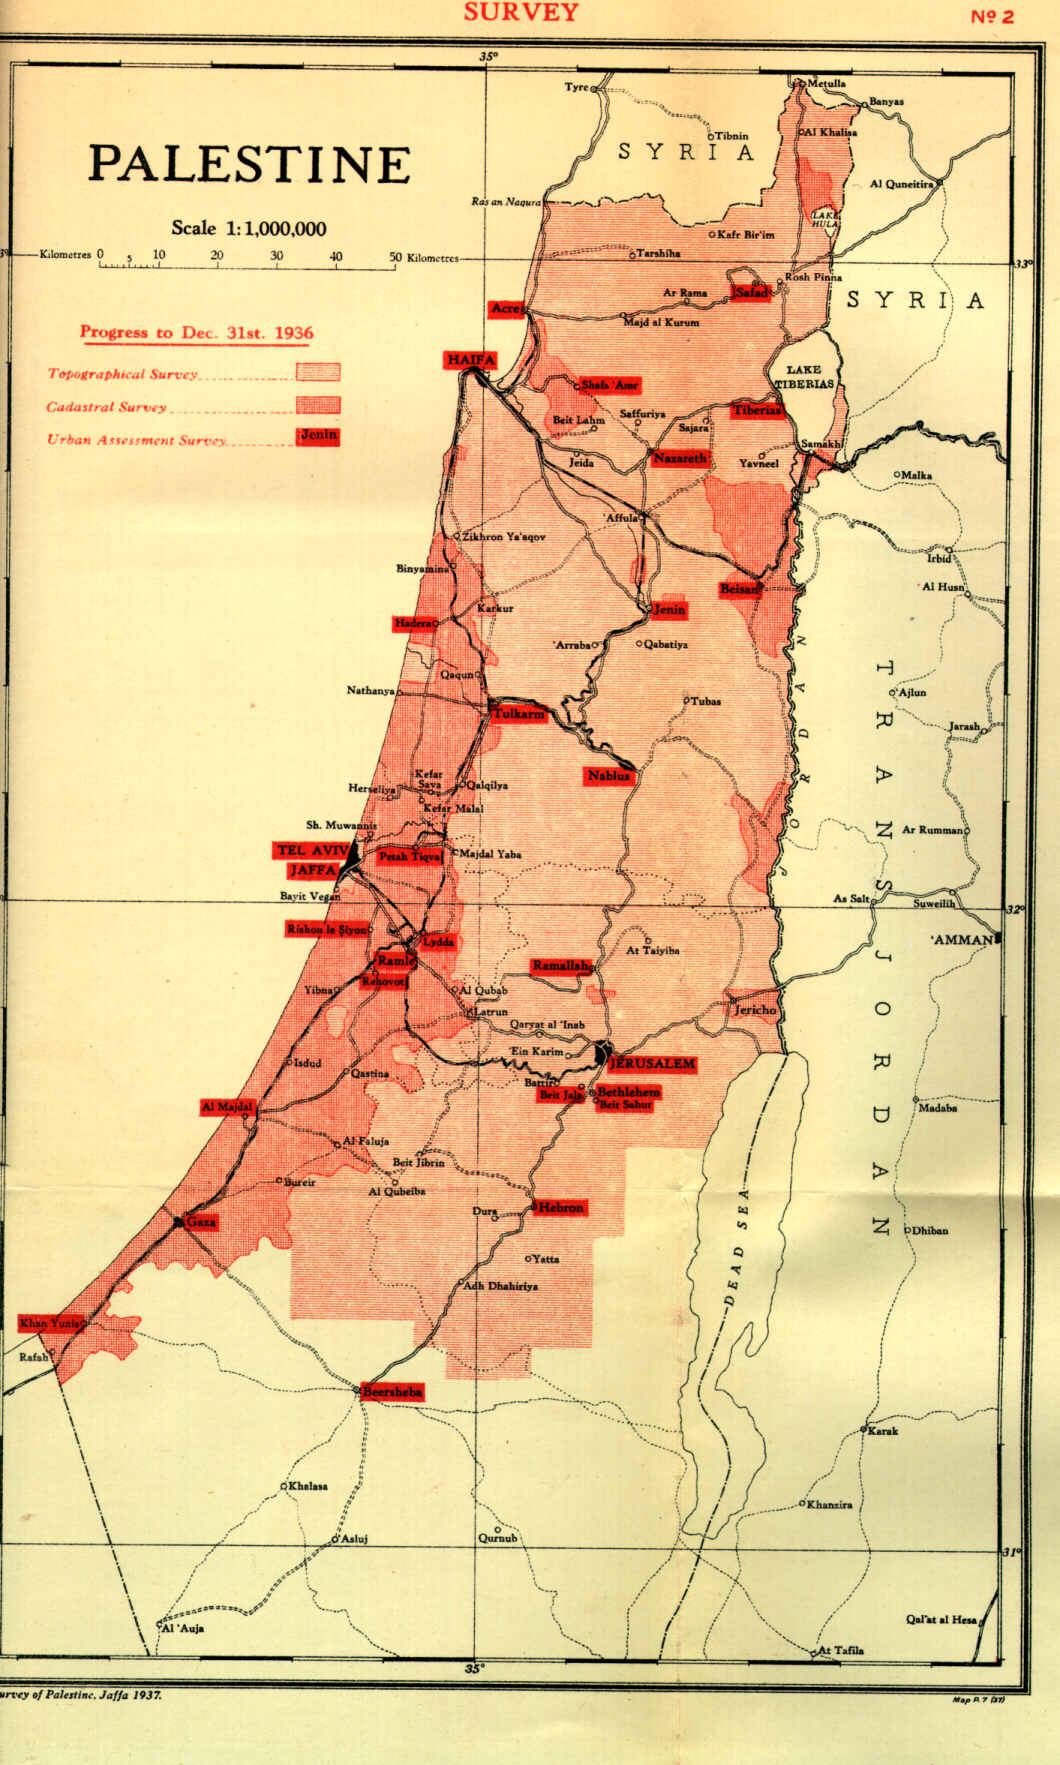 Click to open full-size - Survey Map of Palestine, 1937